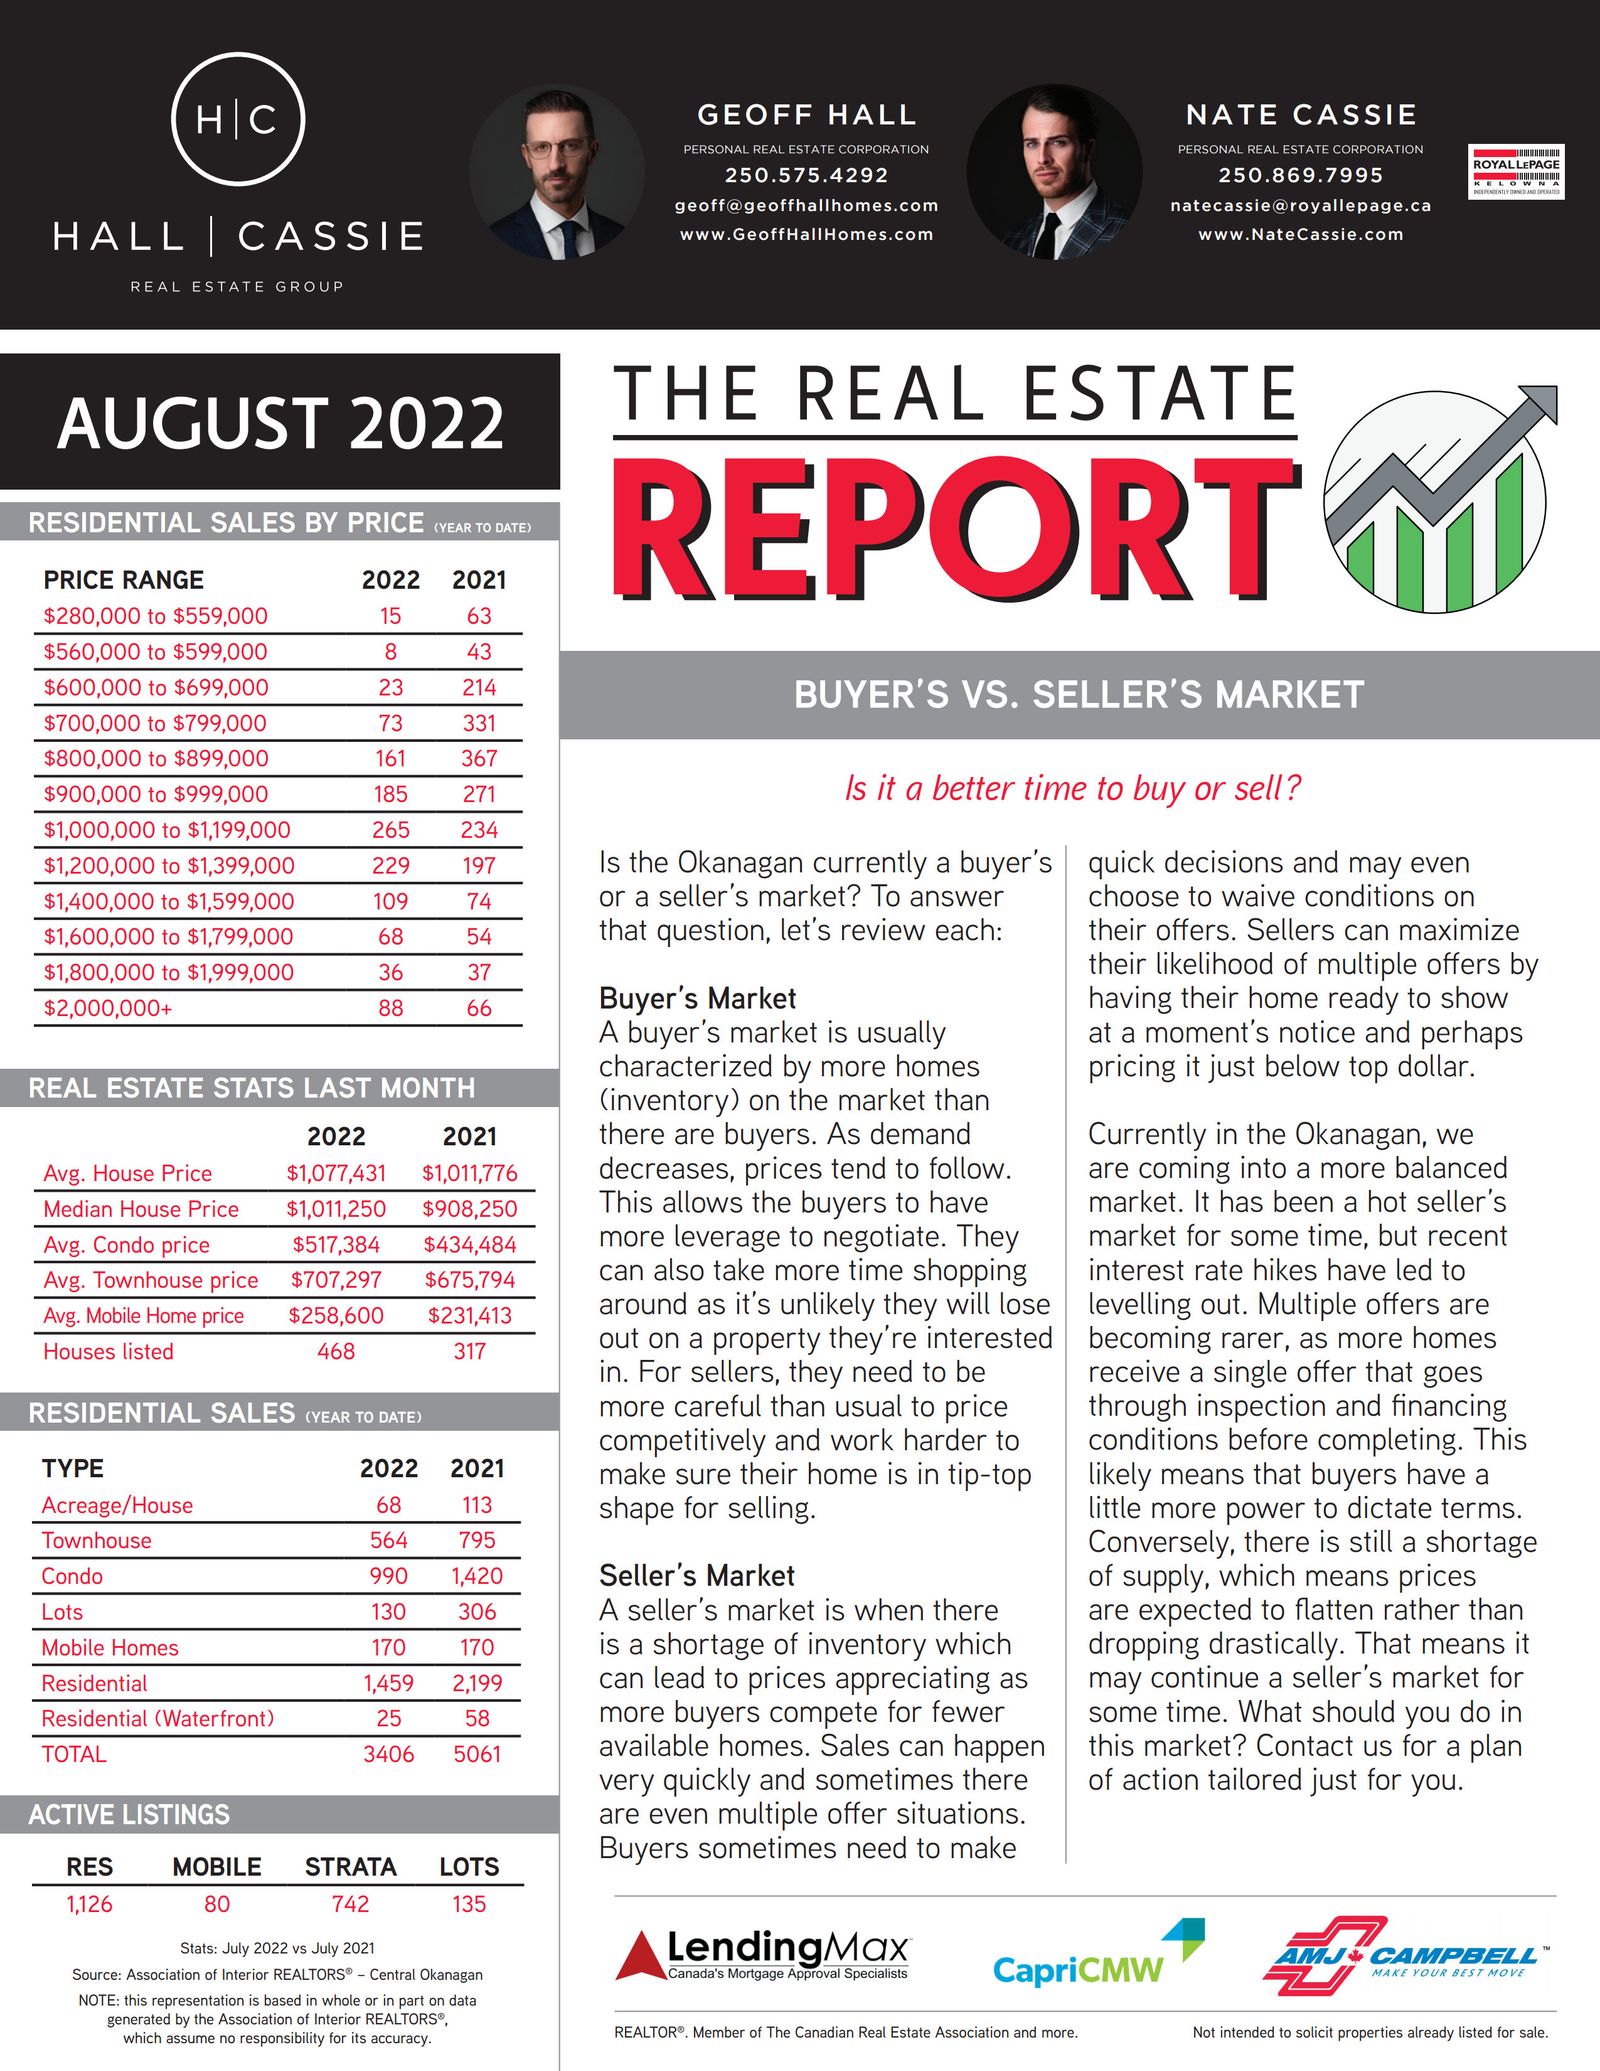 August Real Estate Update